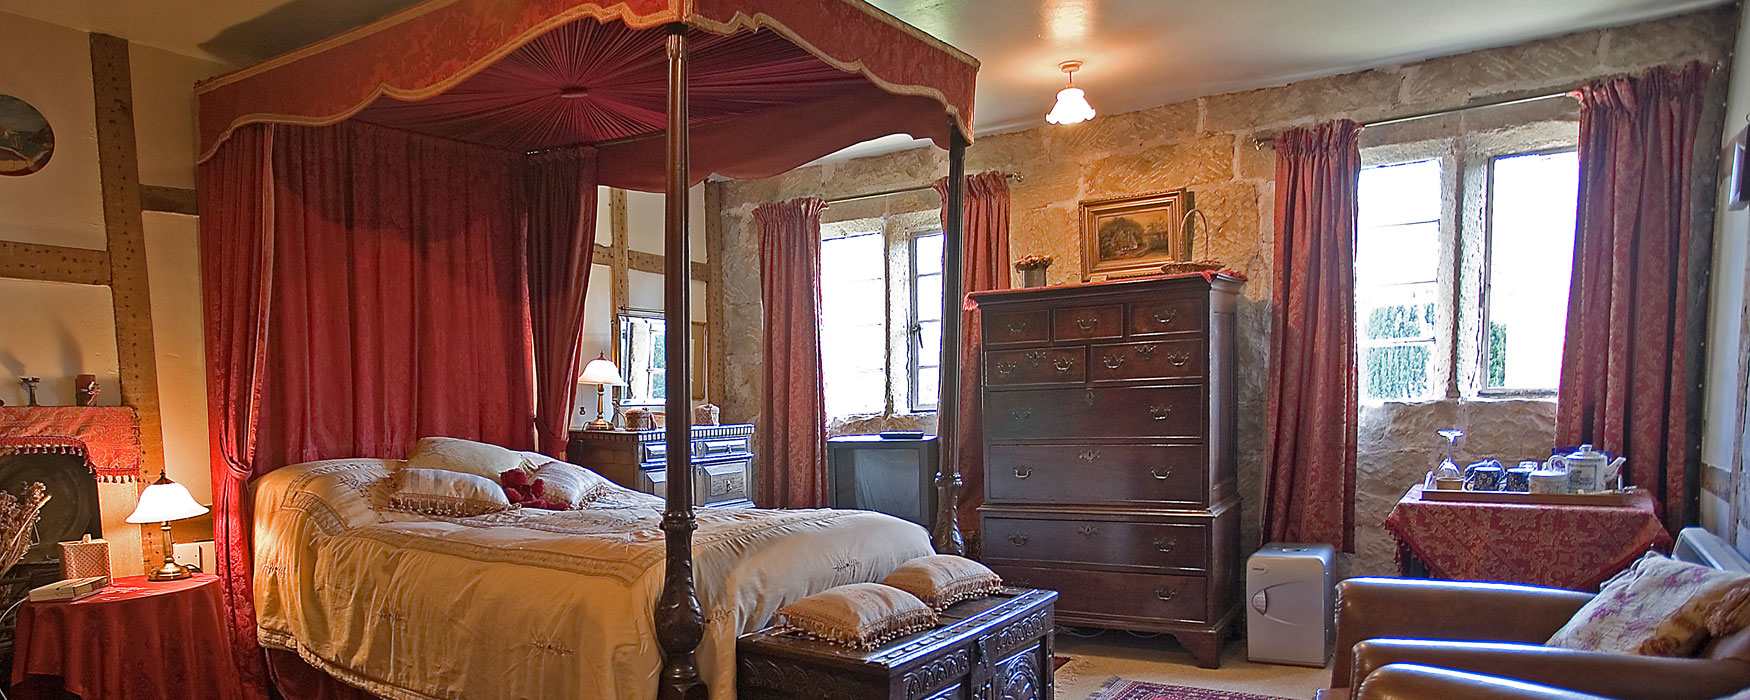 Four poster elegance and period charm